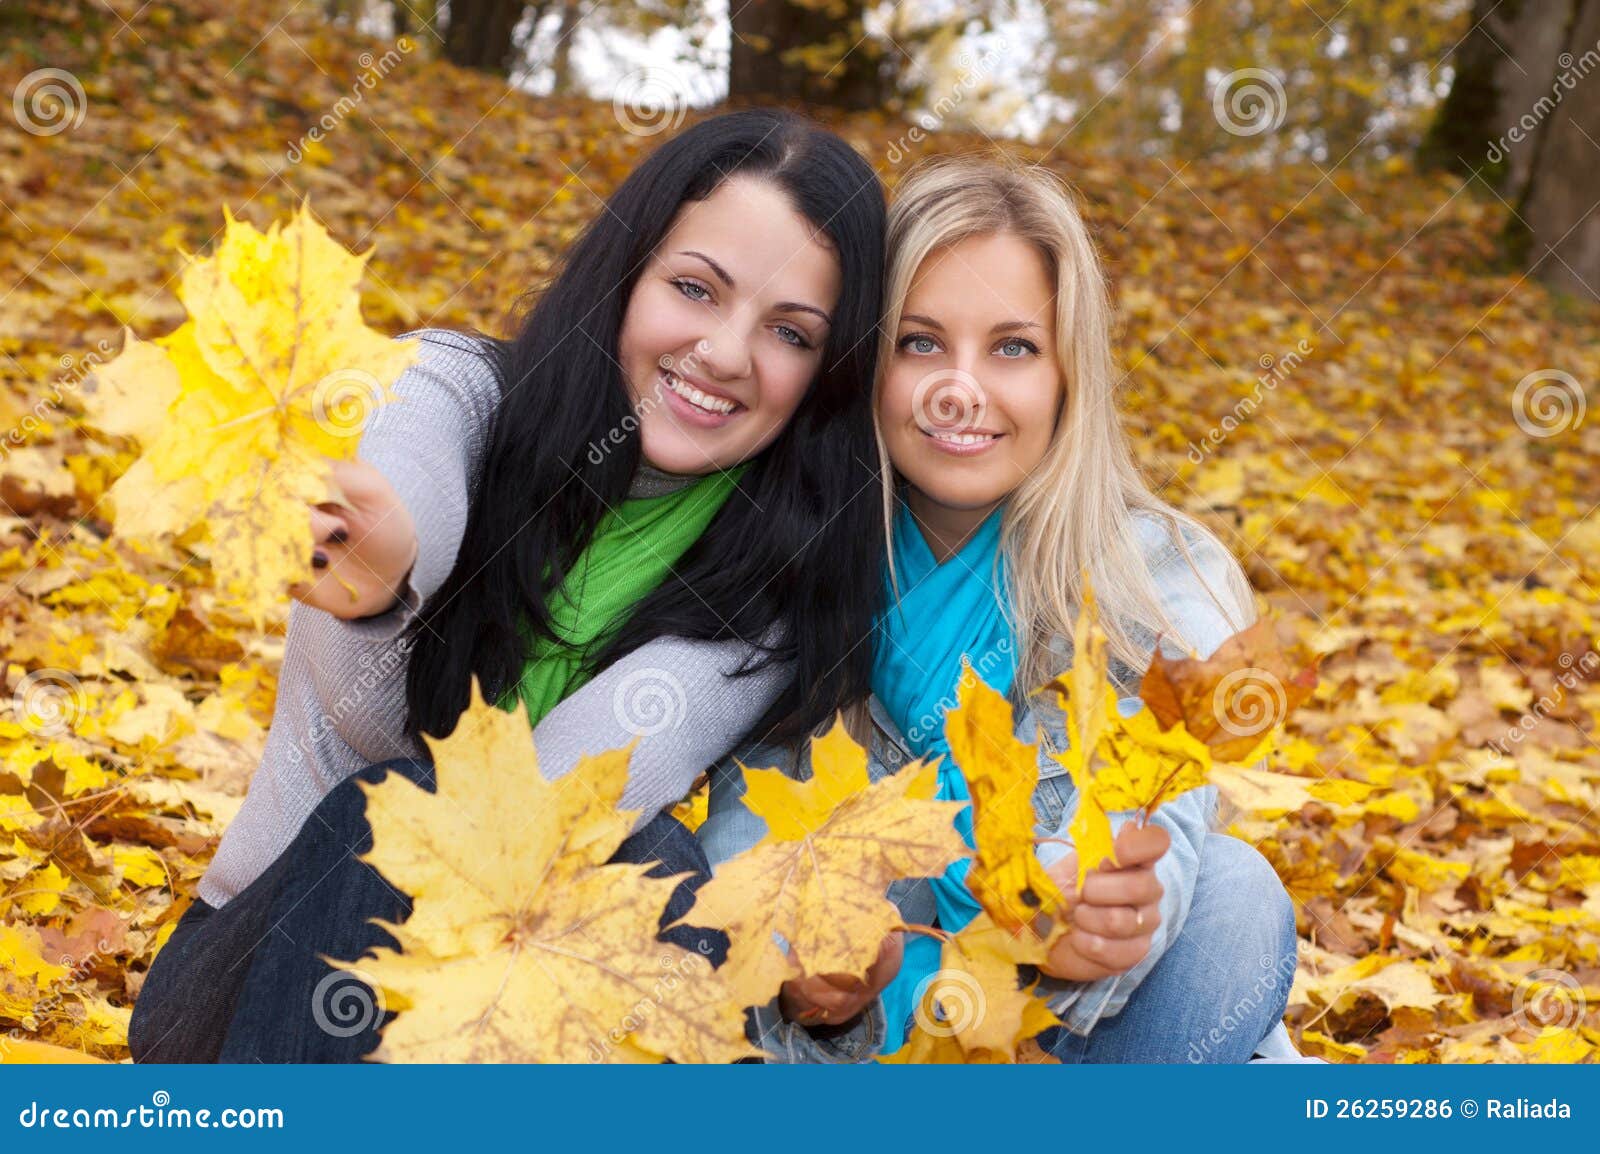 Two Happy Women in Autumn Forest Stock Photo - Image of beautiful ...